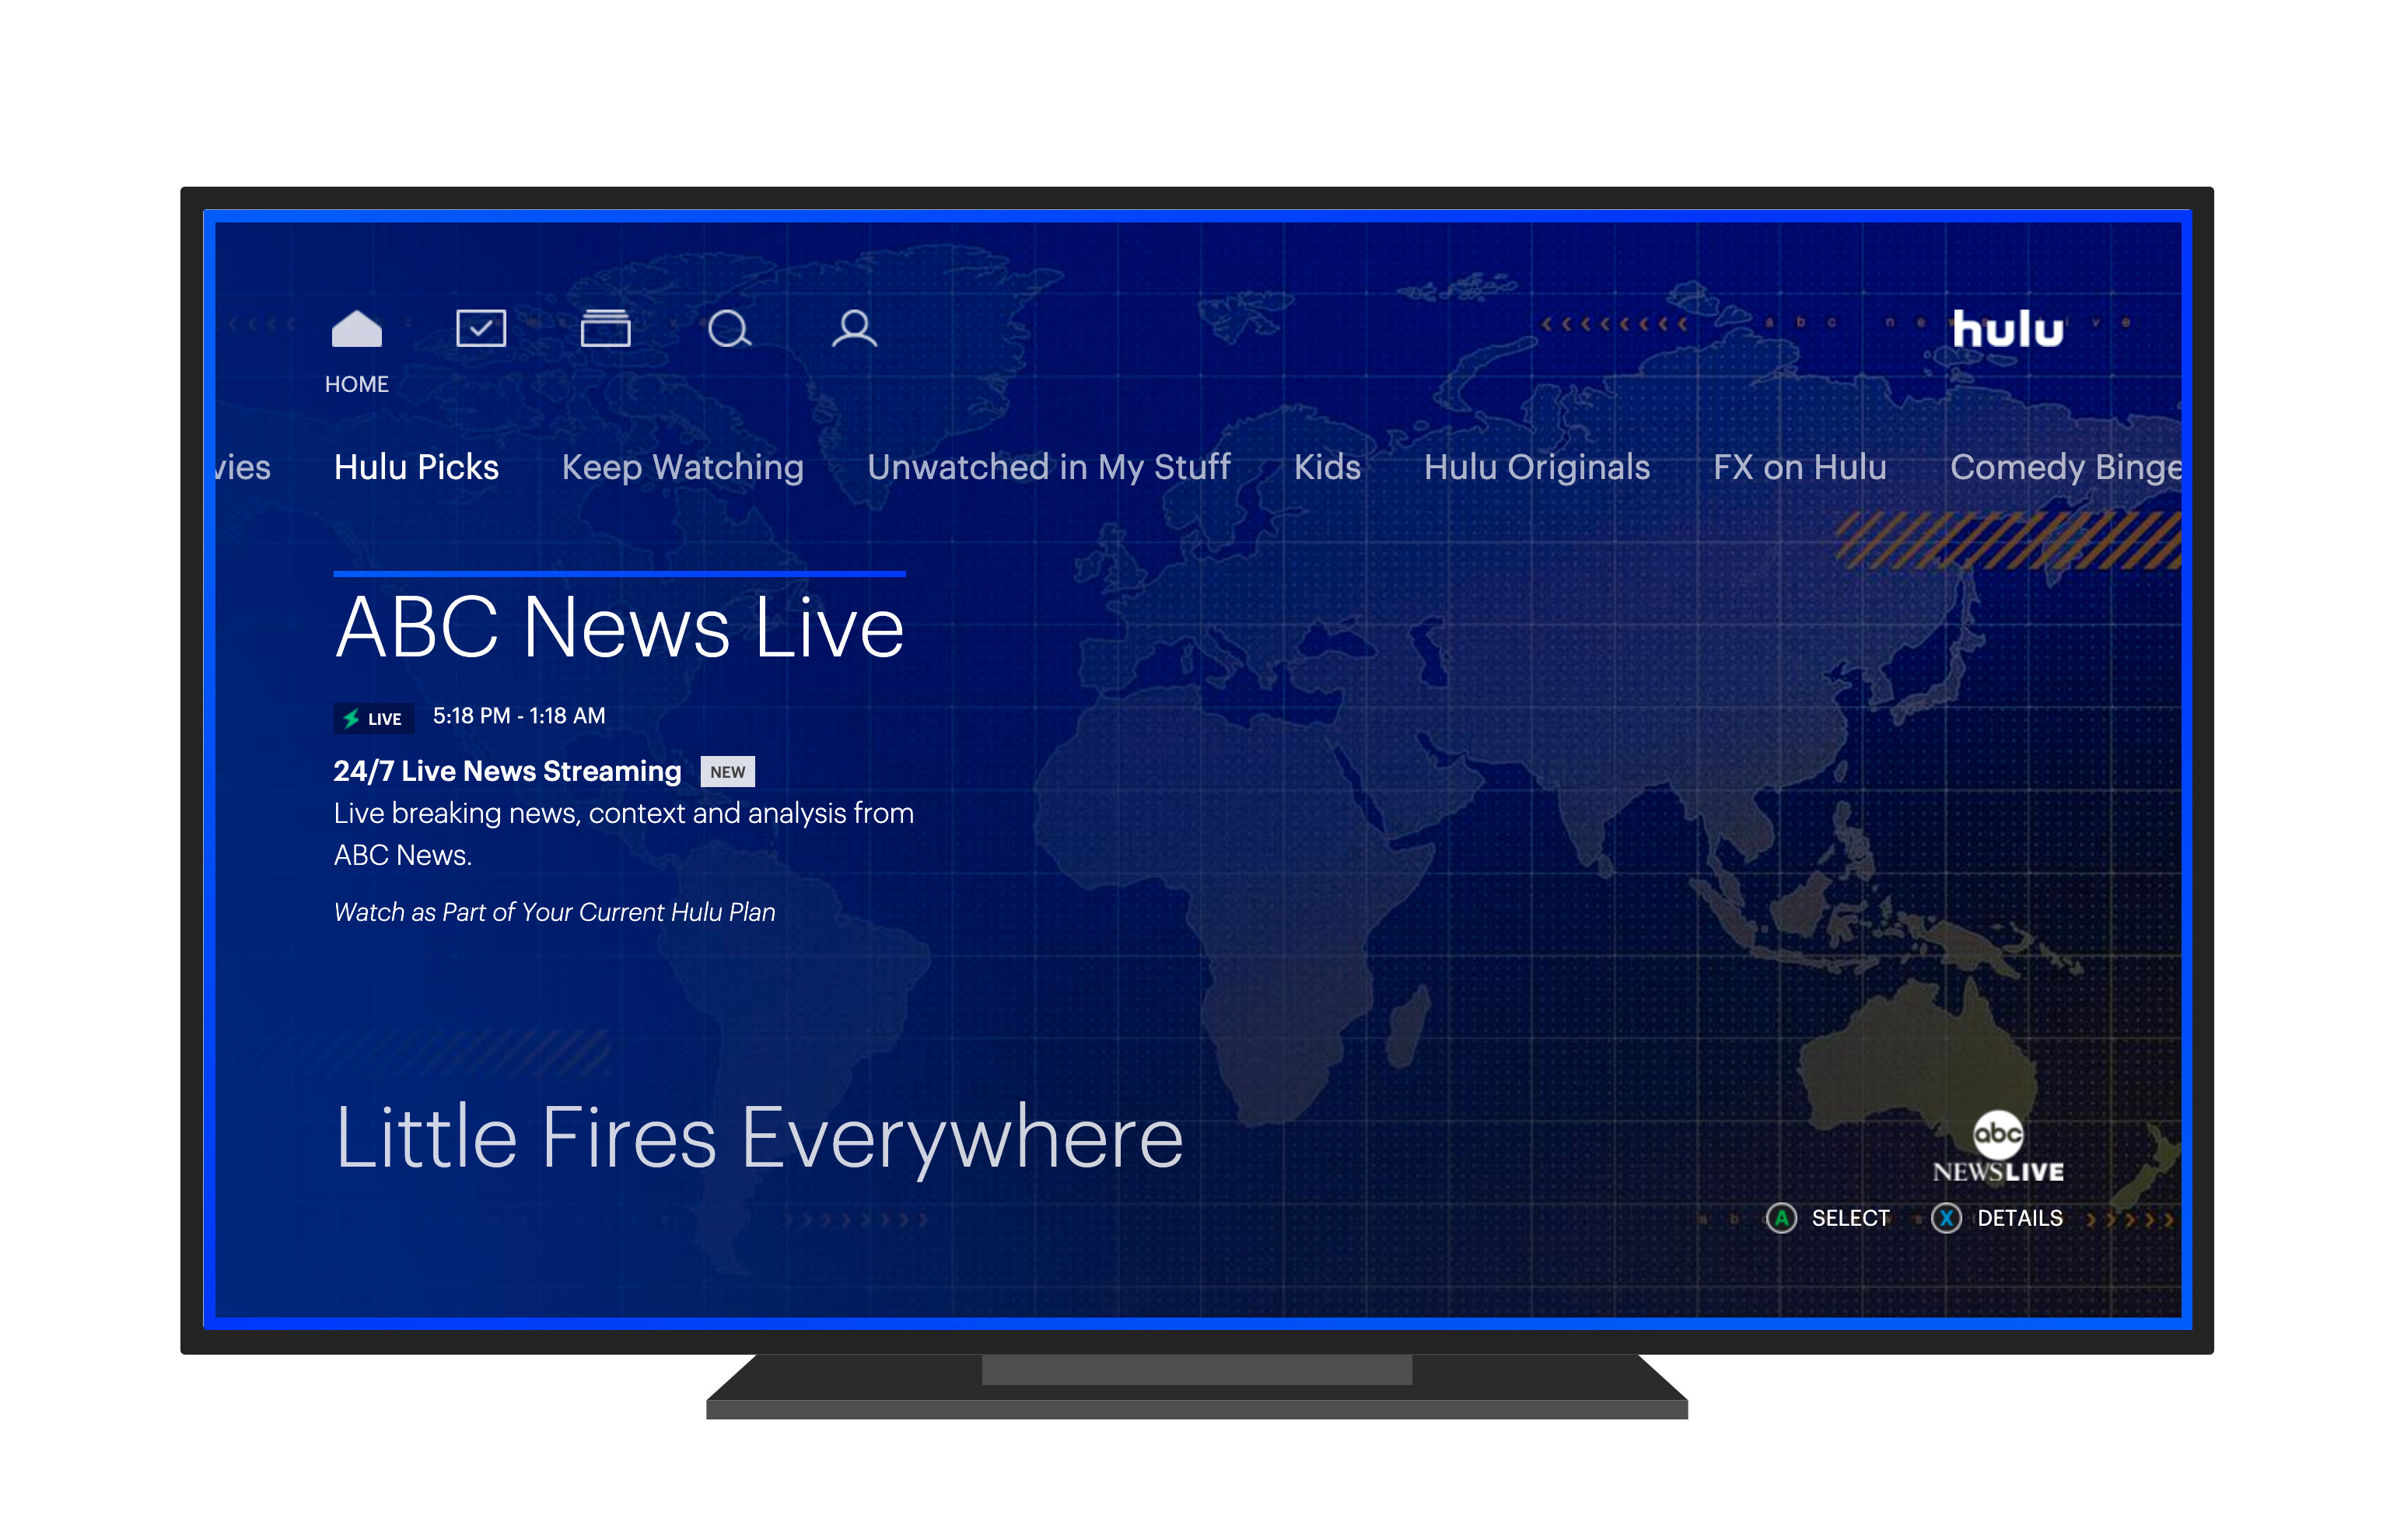 Hulu Launches Free 24/7 Stream of ABC News Live to On-Demand Subscribers